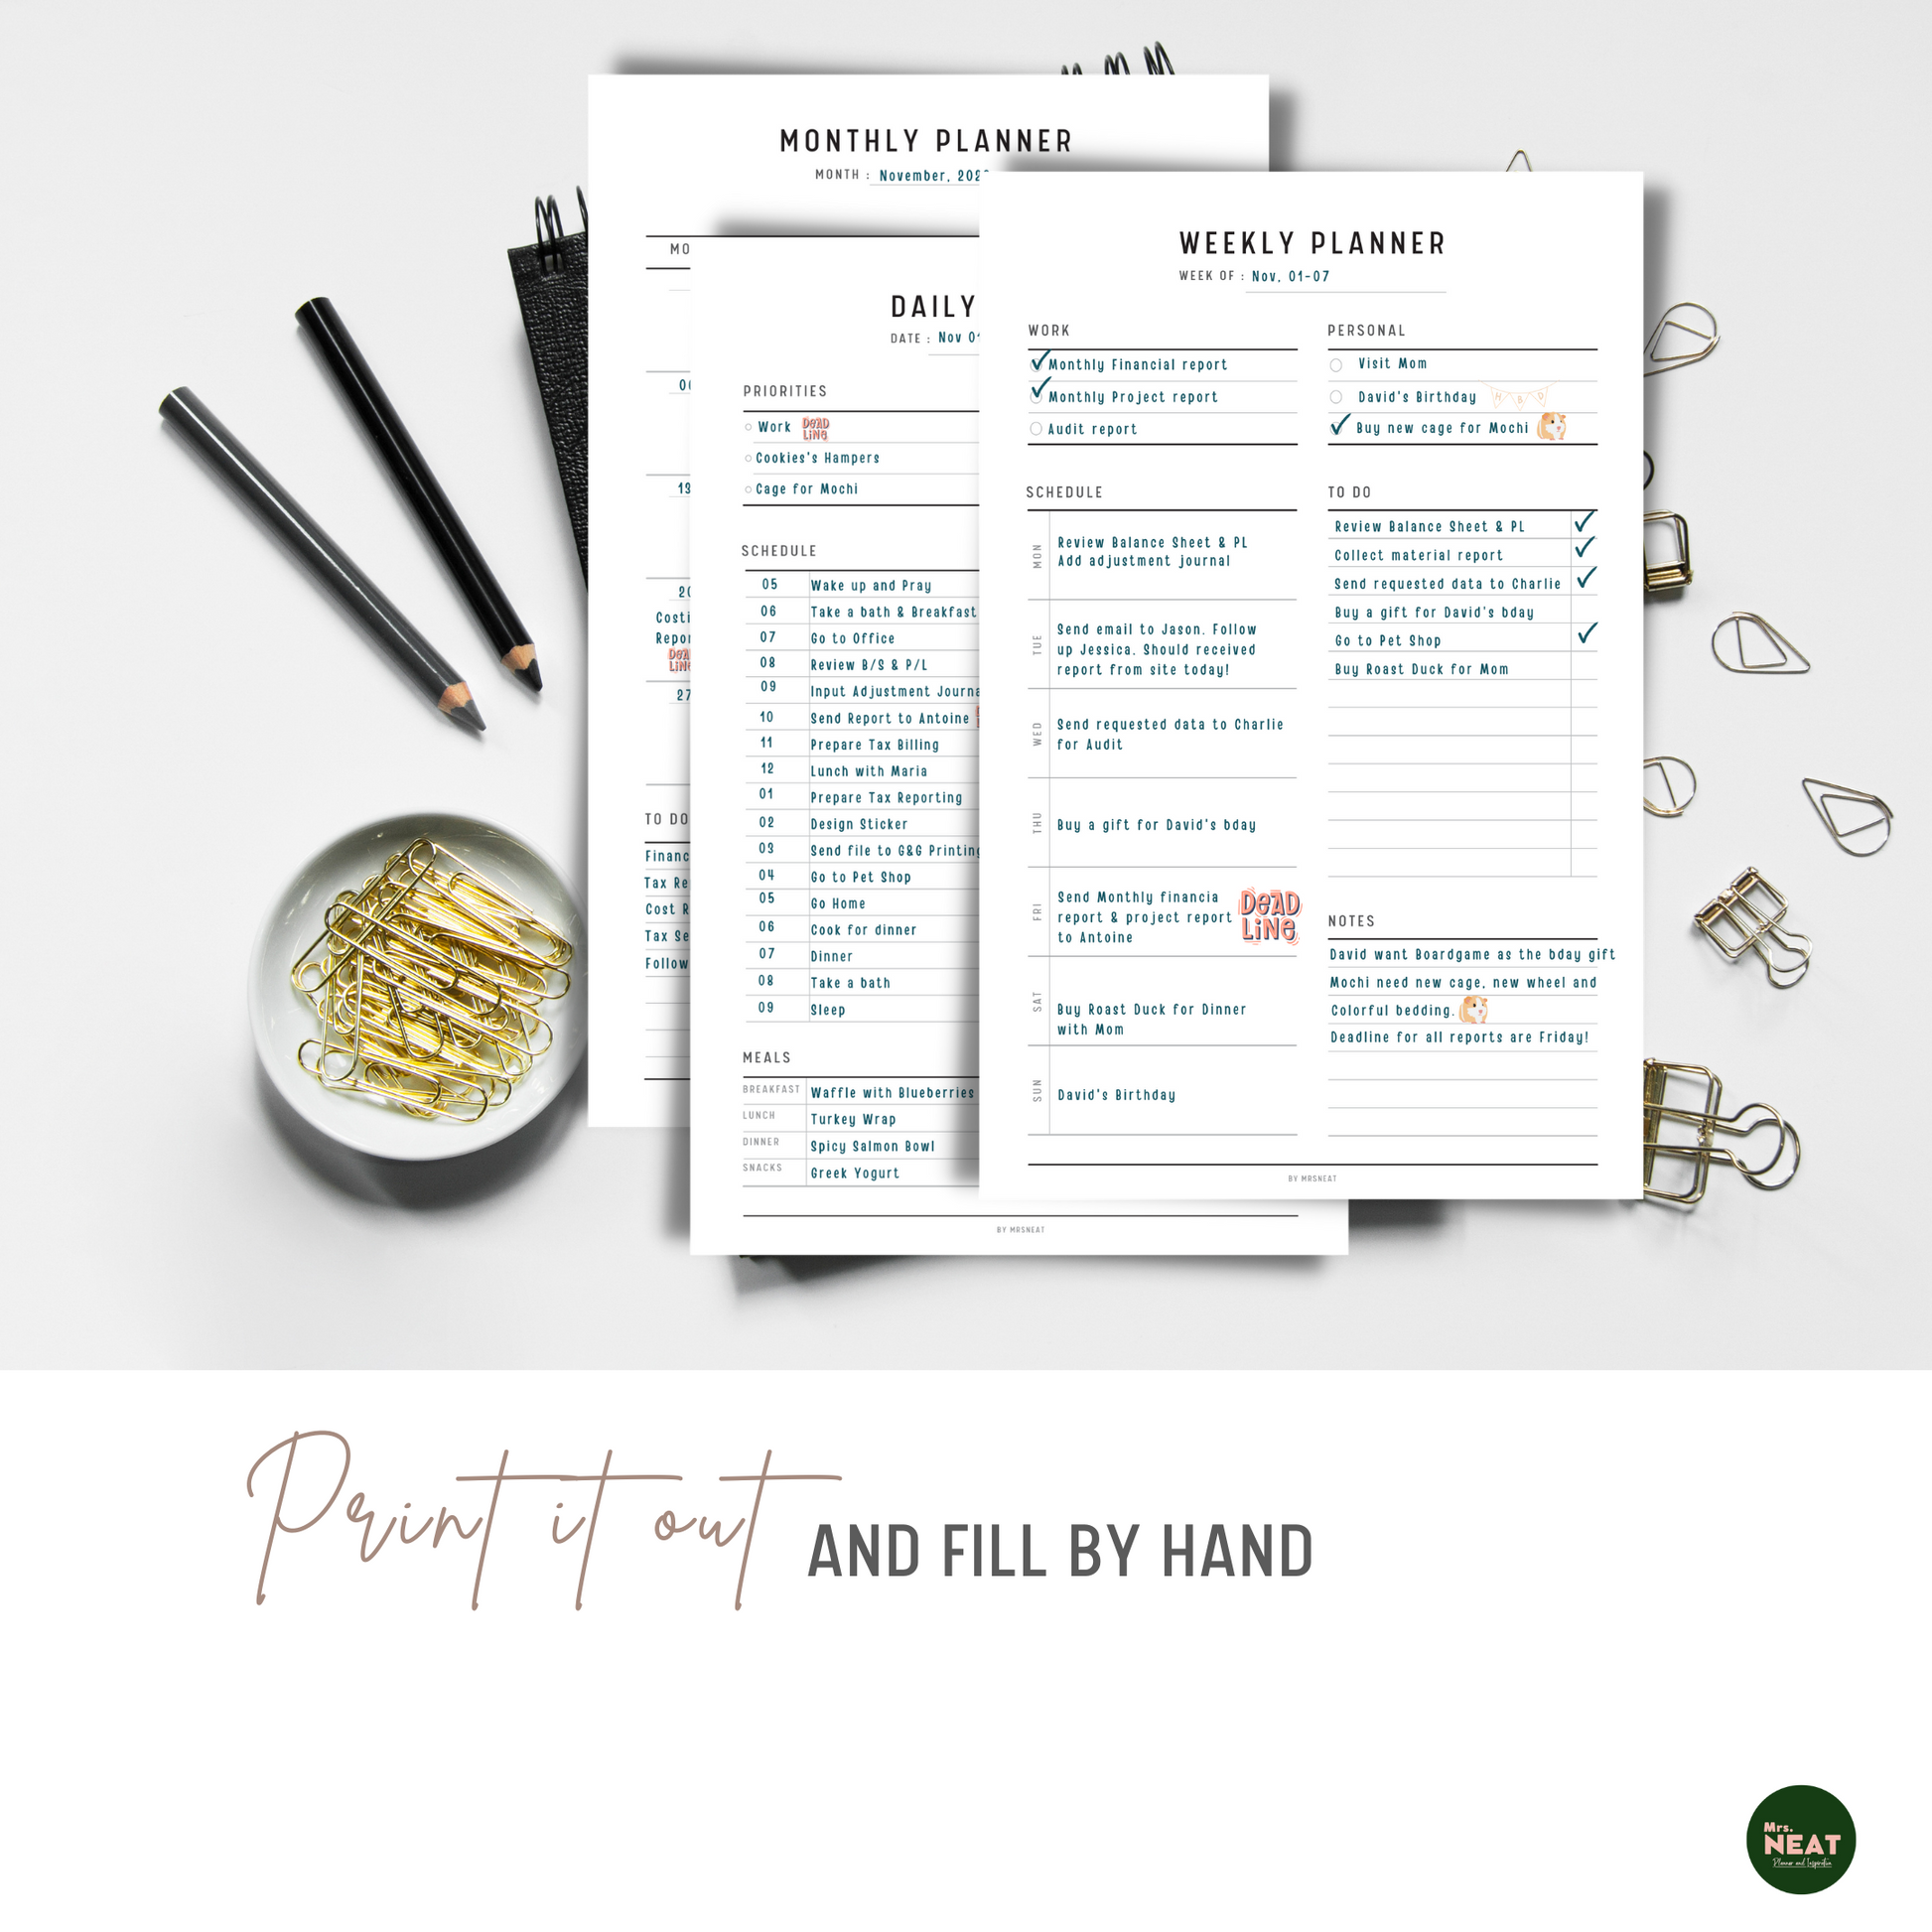 Daily, Weekly and Monthly Planner Printable printed out on the paper with stationery surround